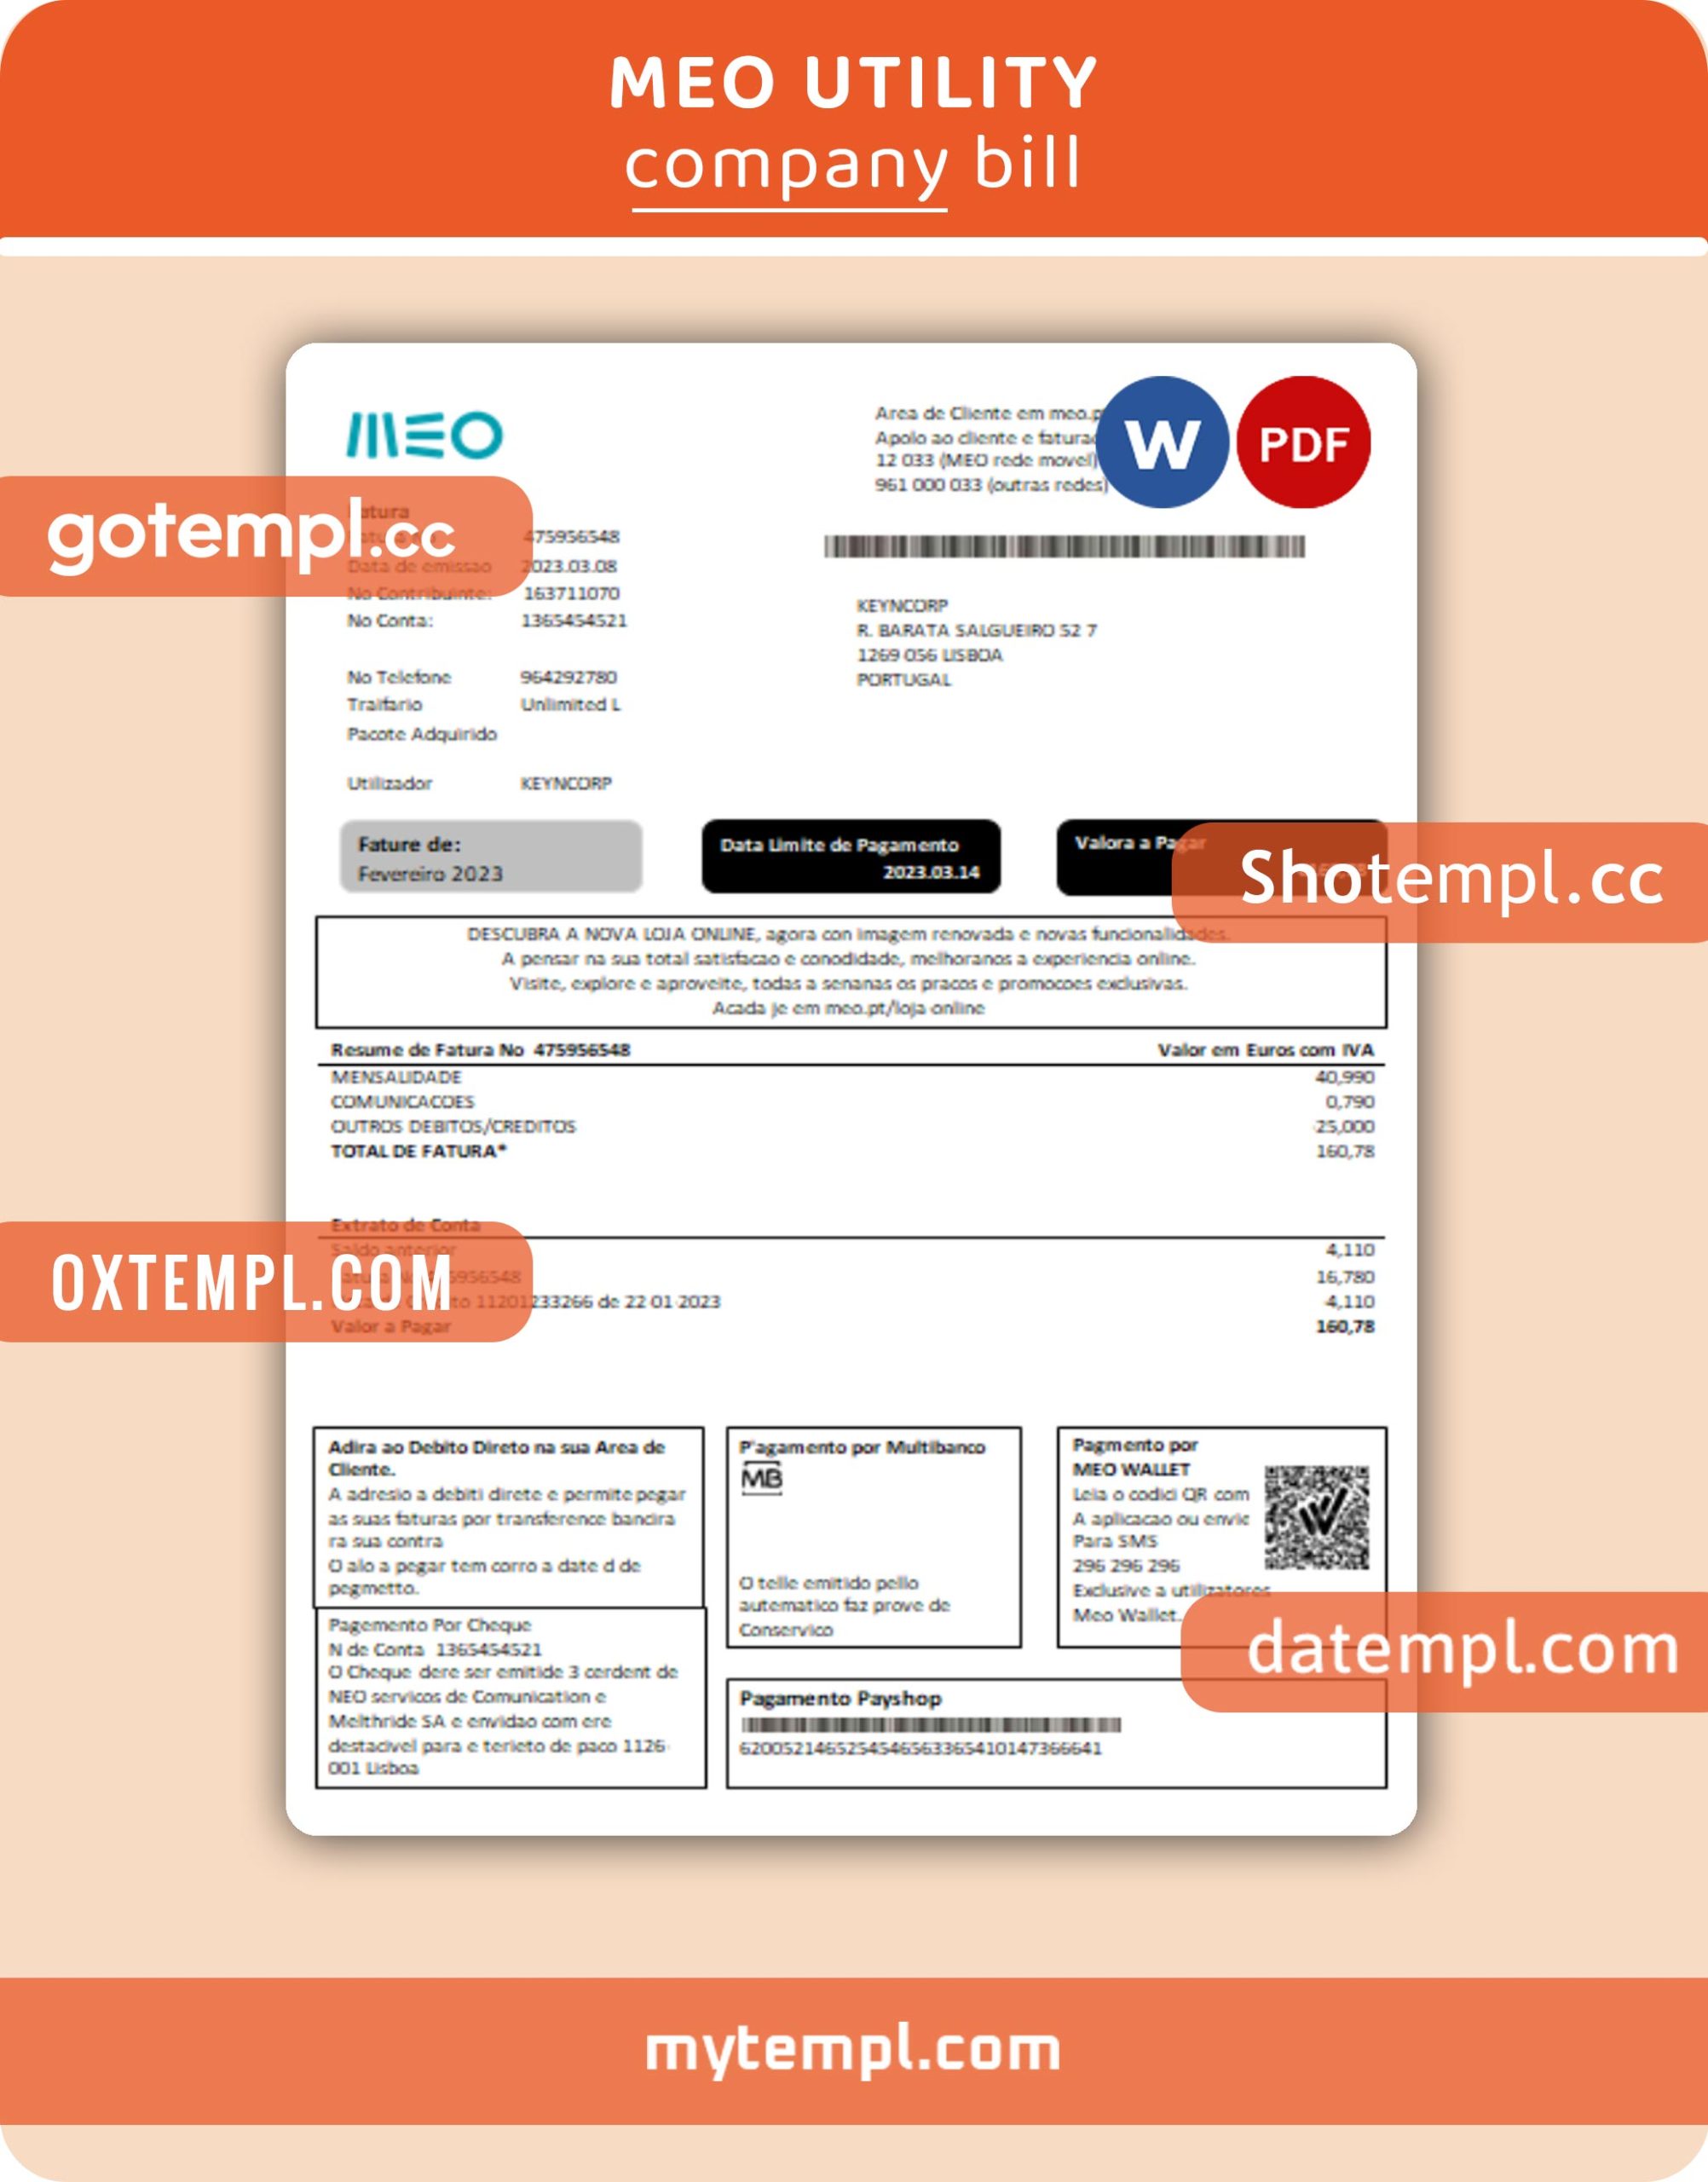 MEO business utility bill, Word and PDF template, 4 pages, version 3